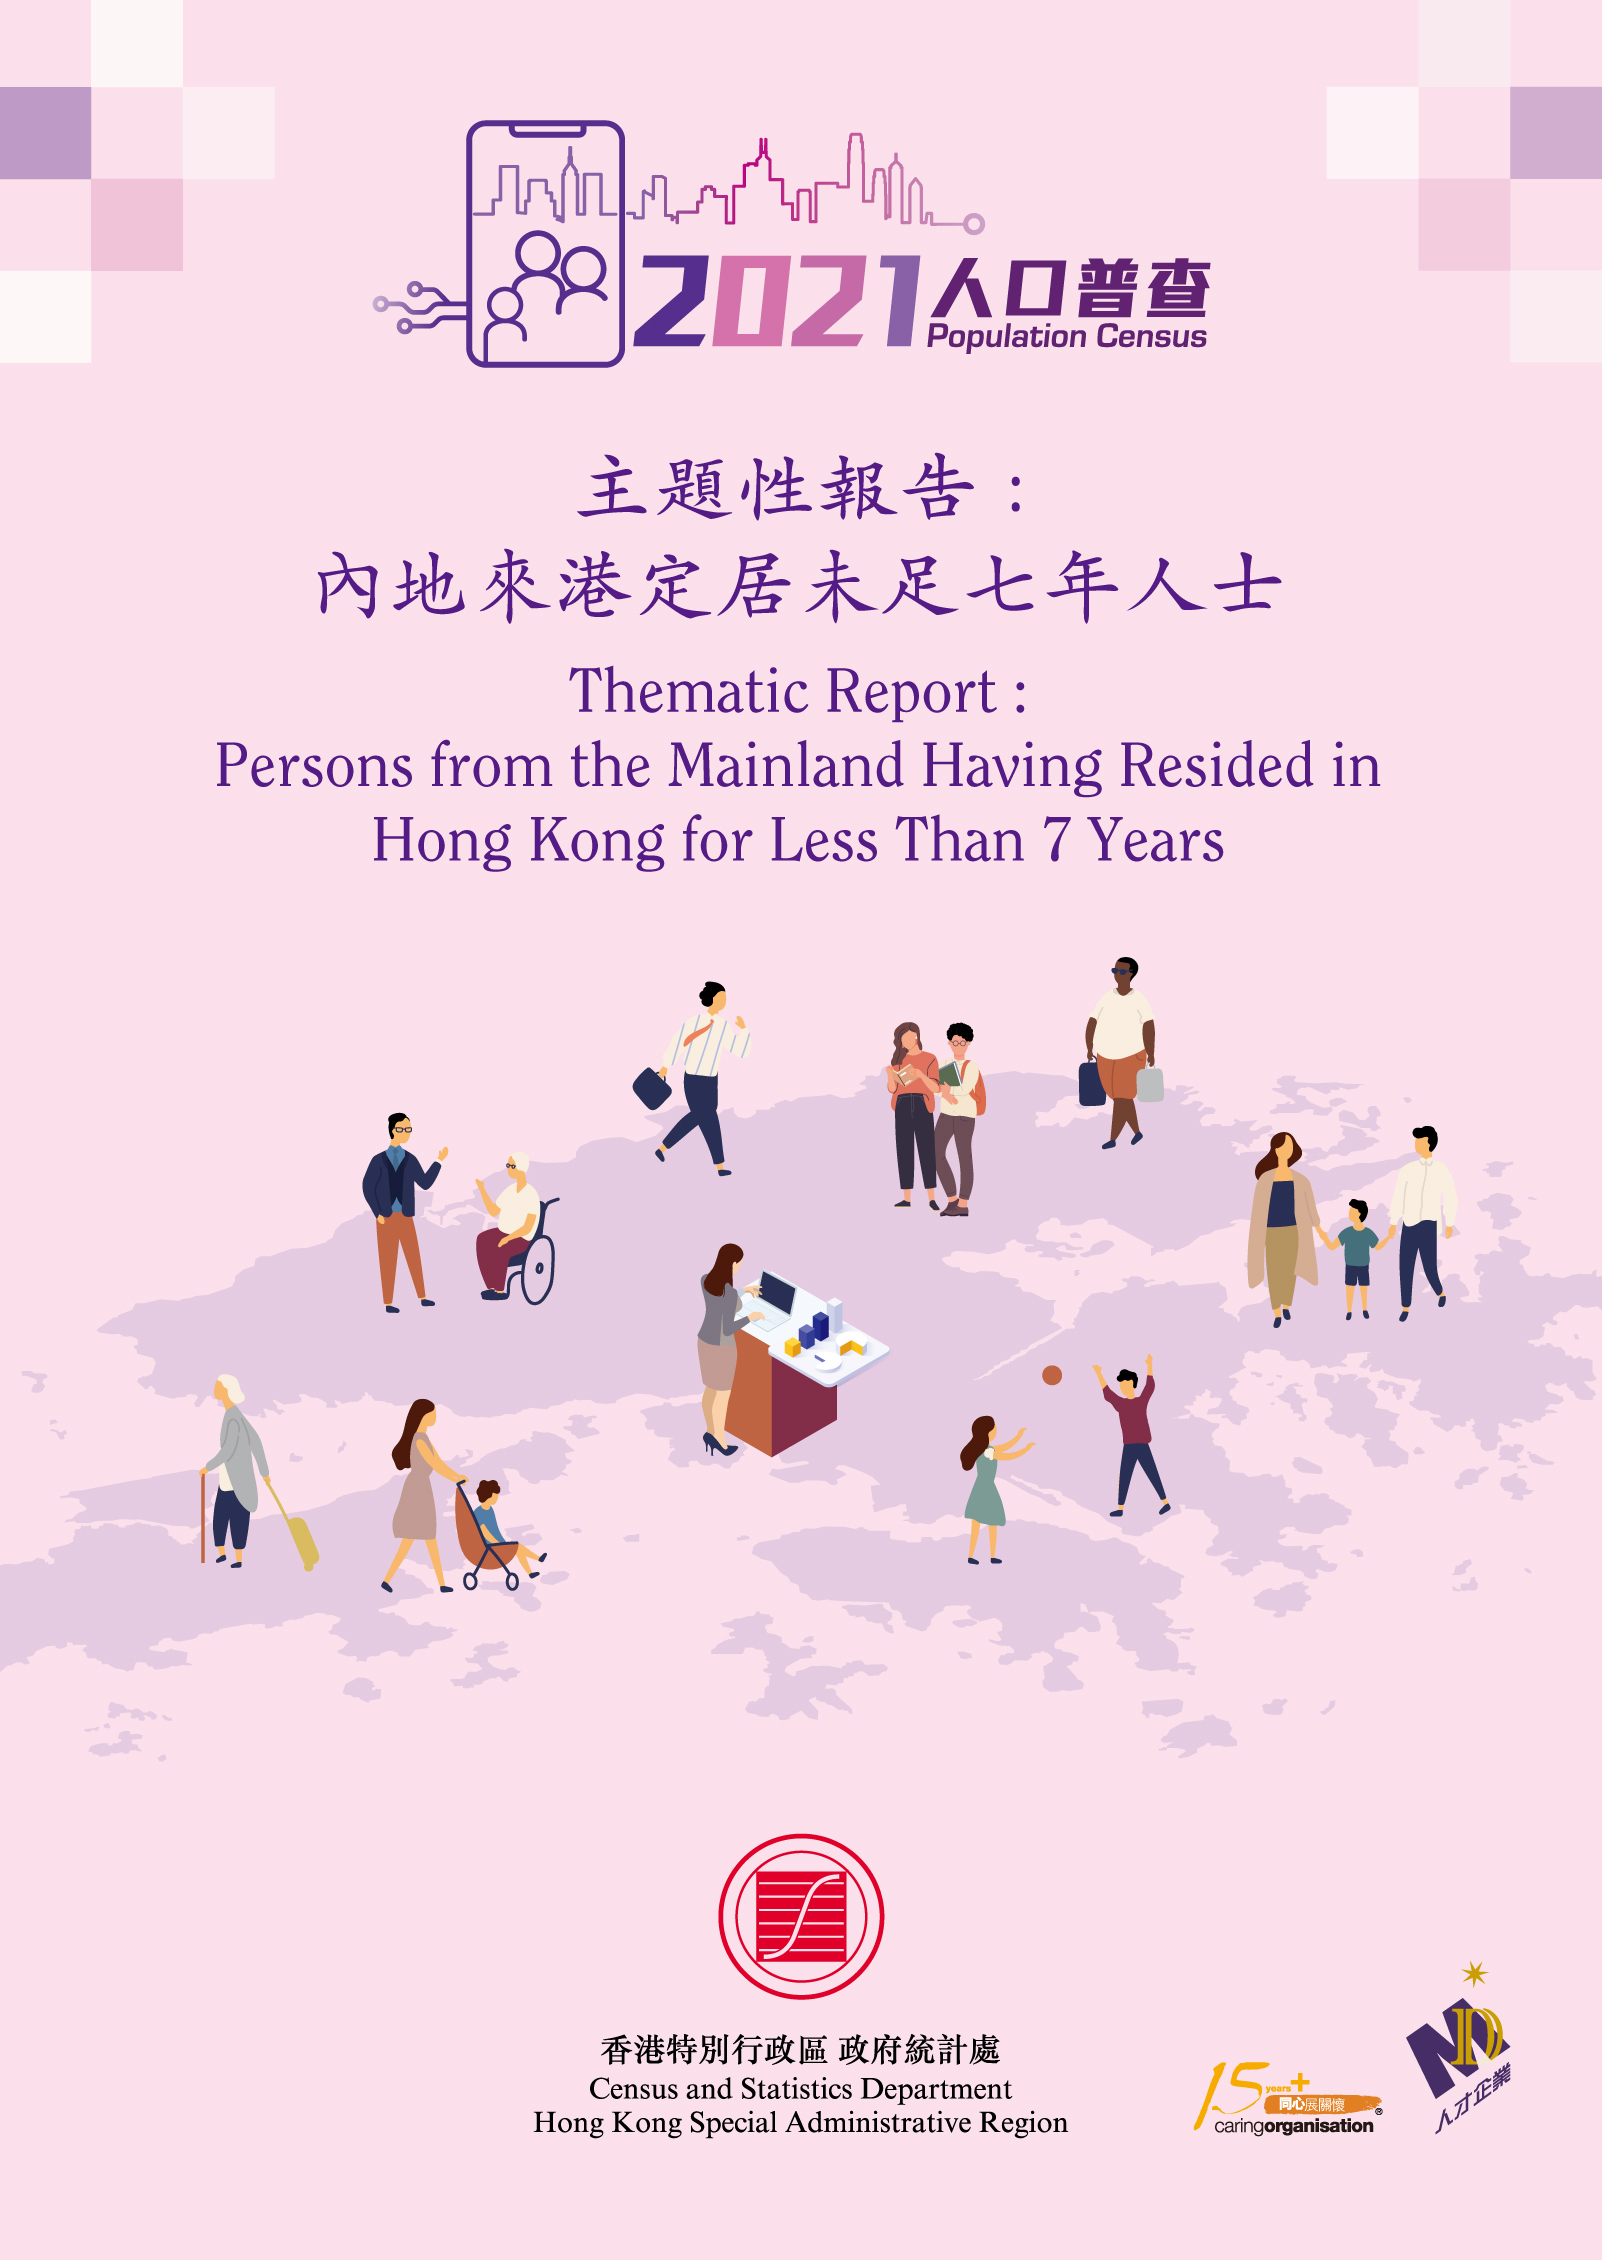 Thematic Report: Persons from the Mainland Having Resided in Hong Kong for Less Than 7 Years